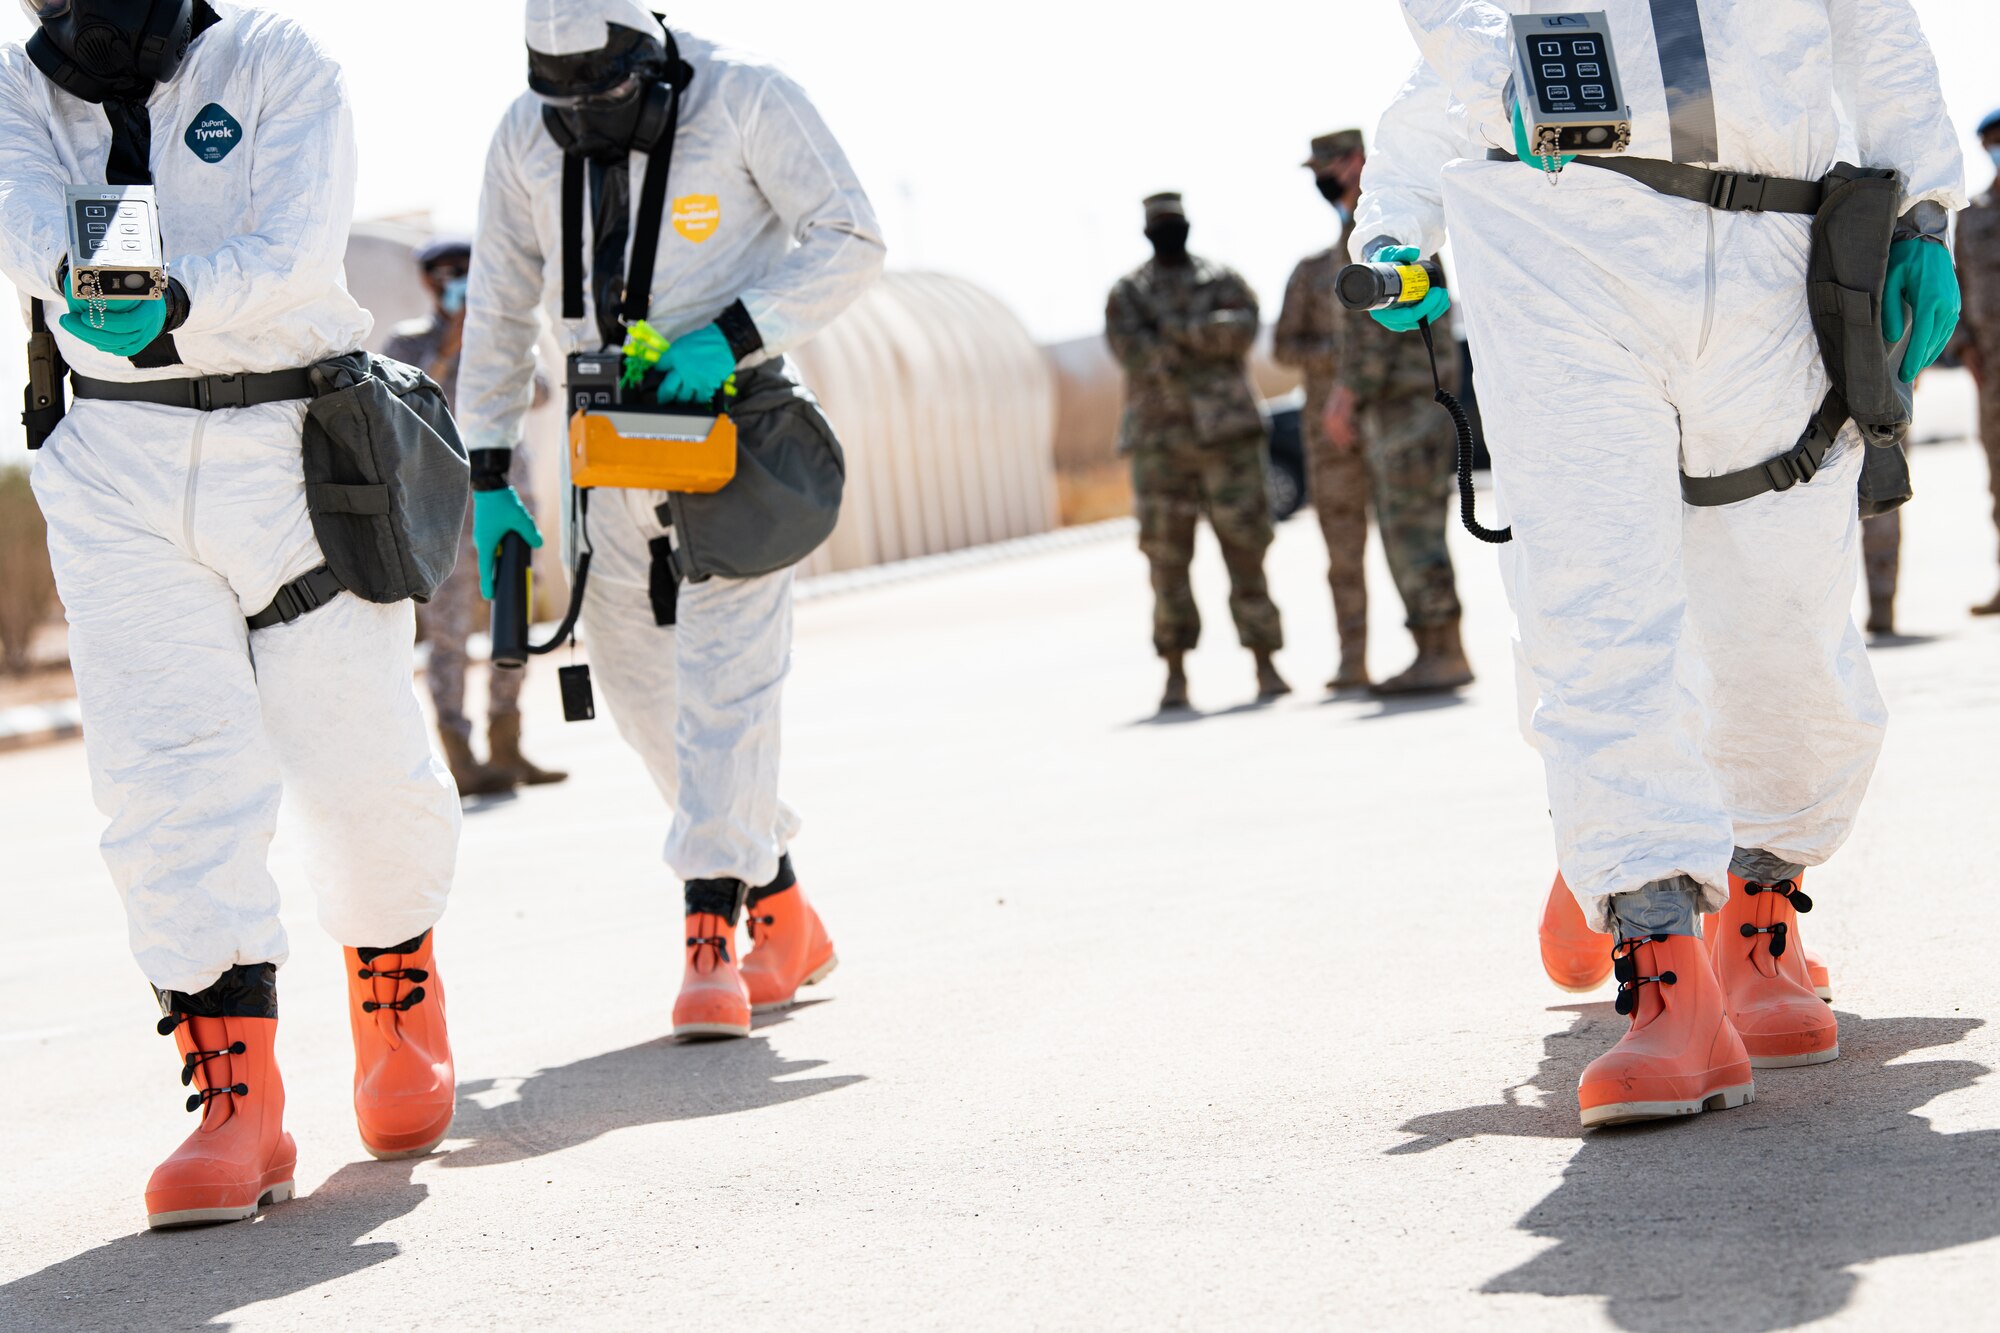 Airmen from the 378th Expeditionary Civil Engineer Squadron emergency management flight and Royal Saudi Air Force personnel shared experience and expertise during a hazardous materials response exercise Dec. 12, 2020, at Prince Sultan Air Base, Kingdom of Saudi Arabia.